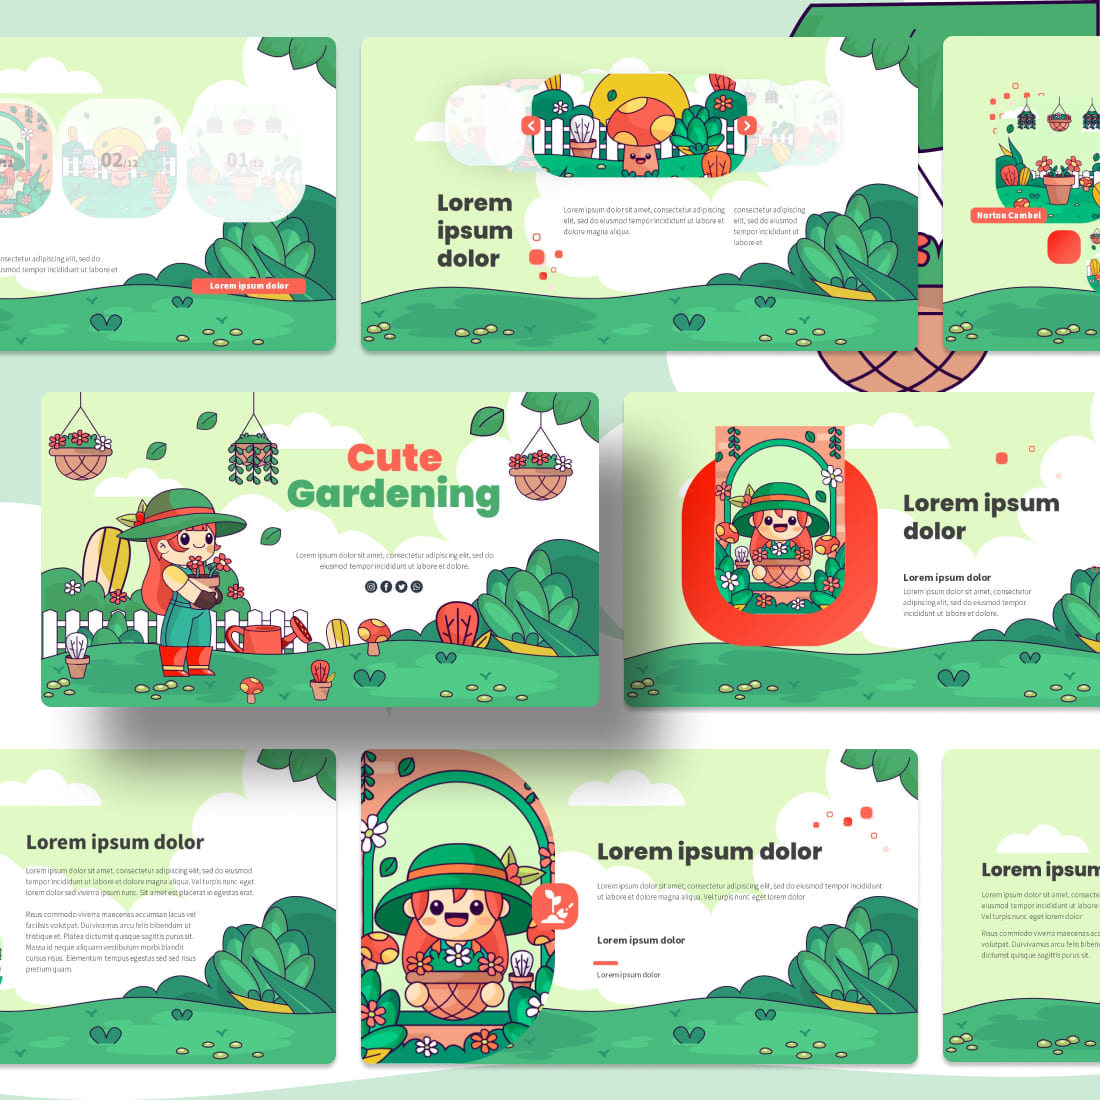 Cute Gardening Powerpoint Template cover.